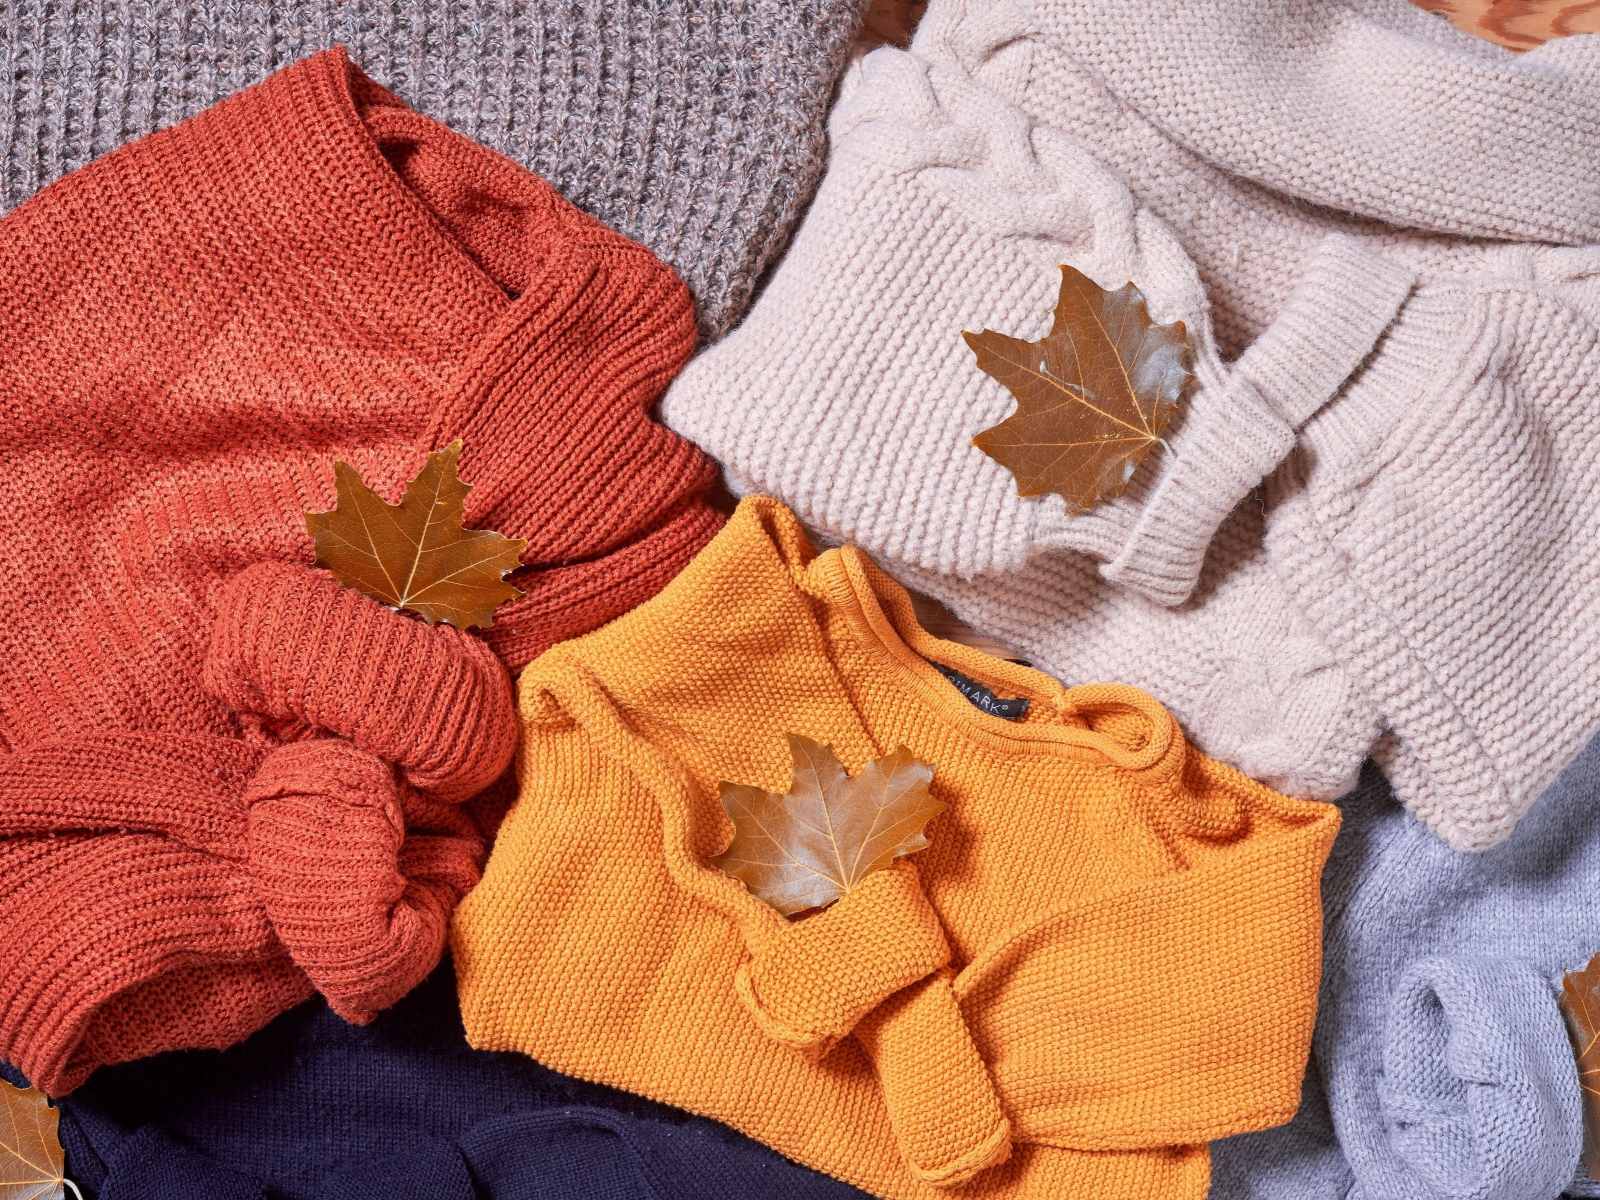 Warm knitted clothes with autumn leaves